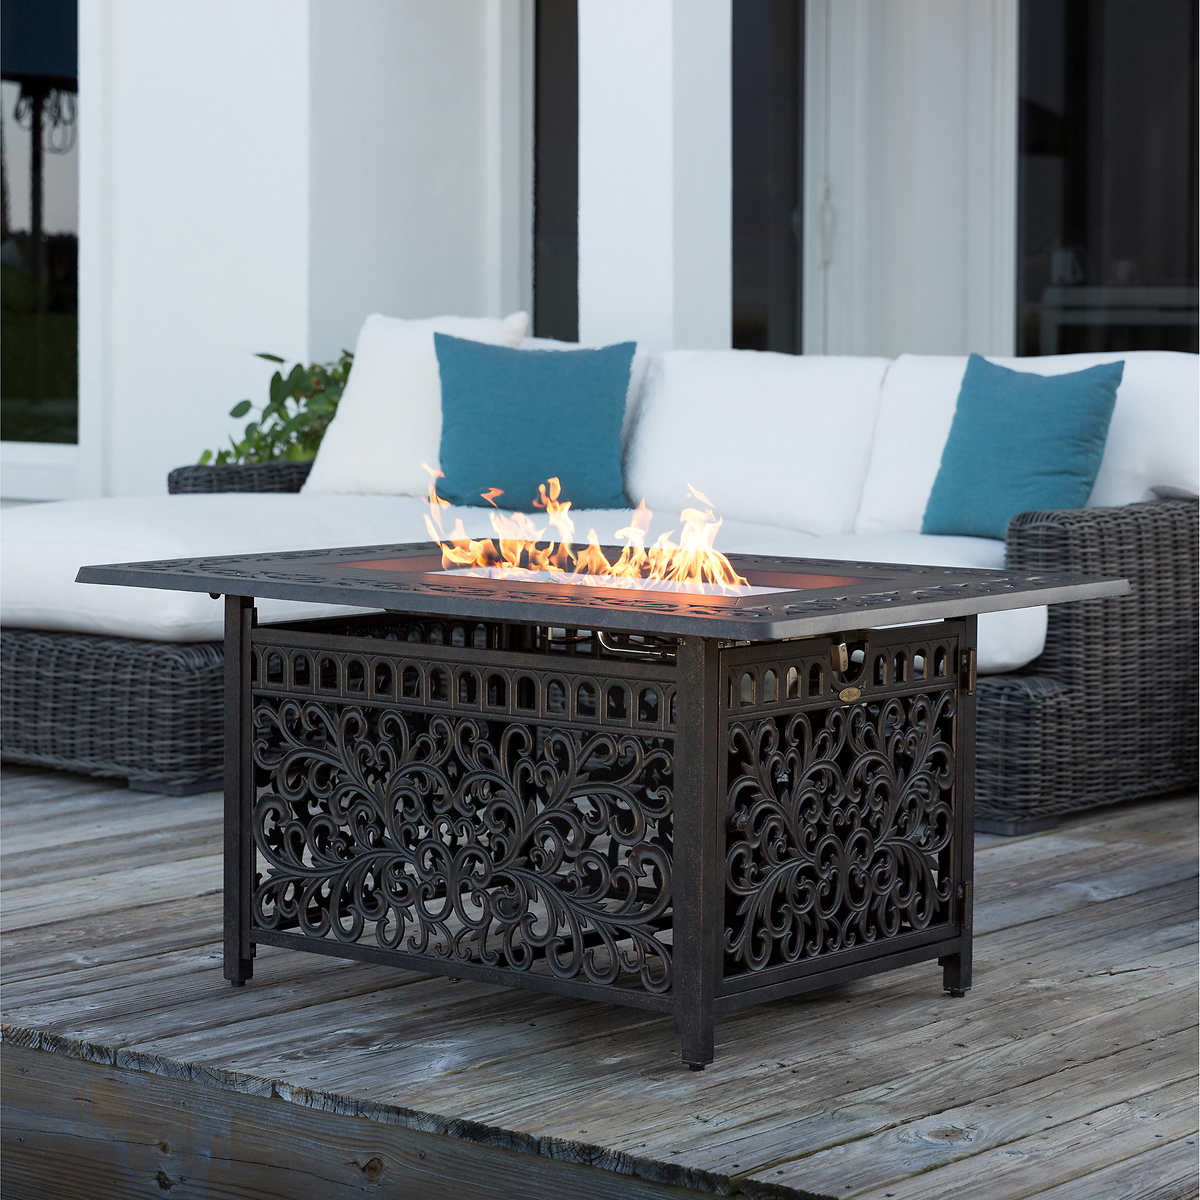 Sedona Cast Aluminum Rectangular Gas, Two Tiered Steel Propane Fire Pit Table